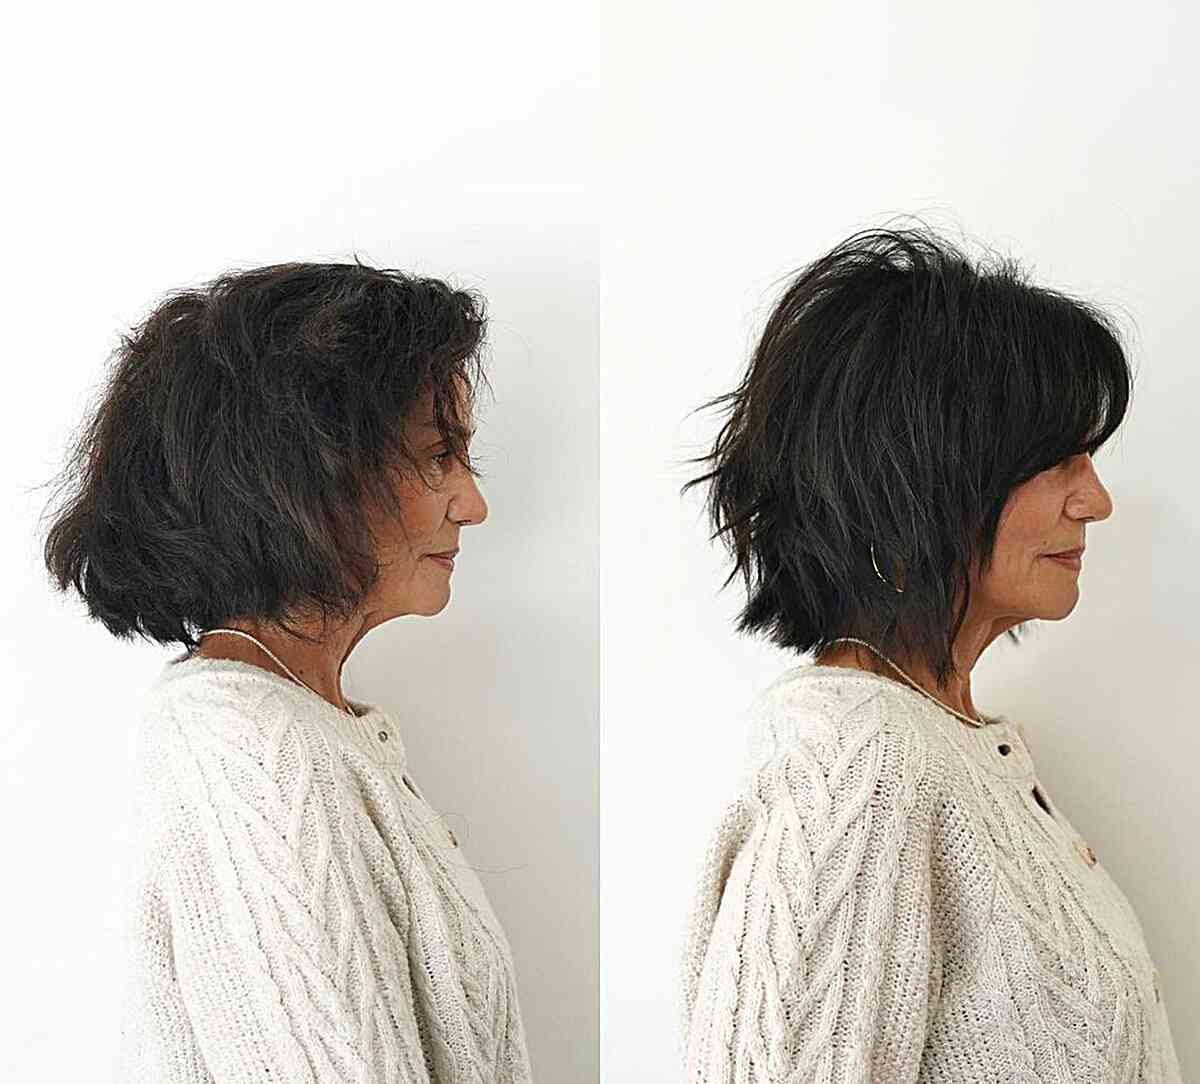 Textured Above-the-Shoulder Bob with Fringe for women with dark hair